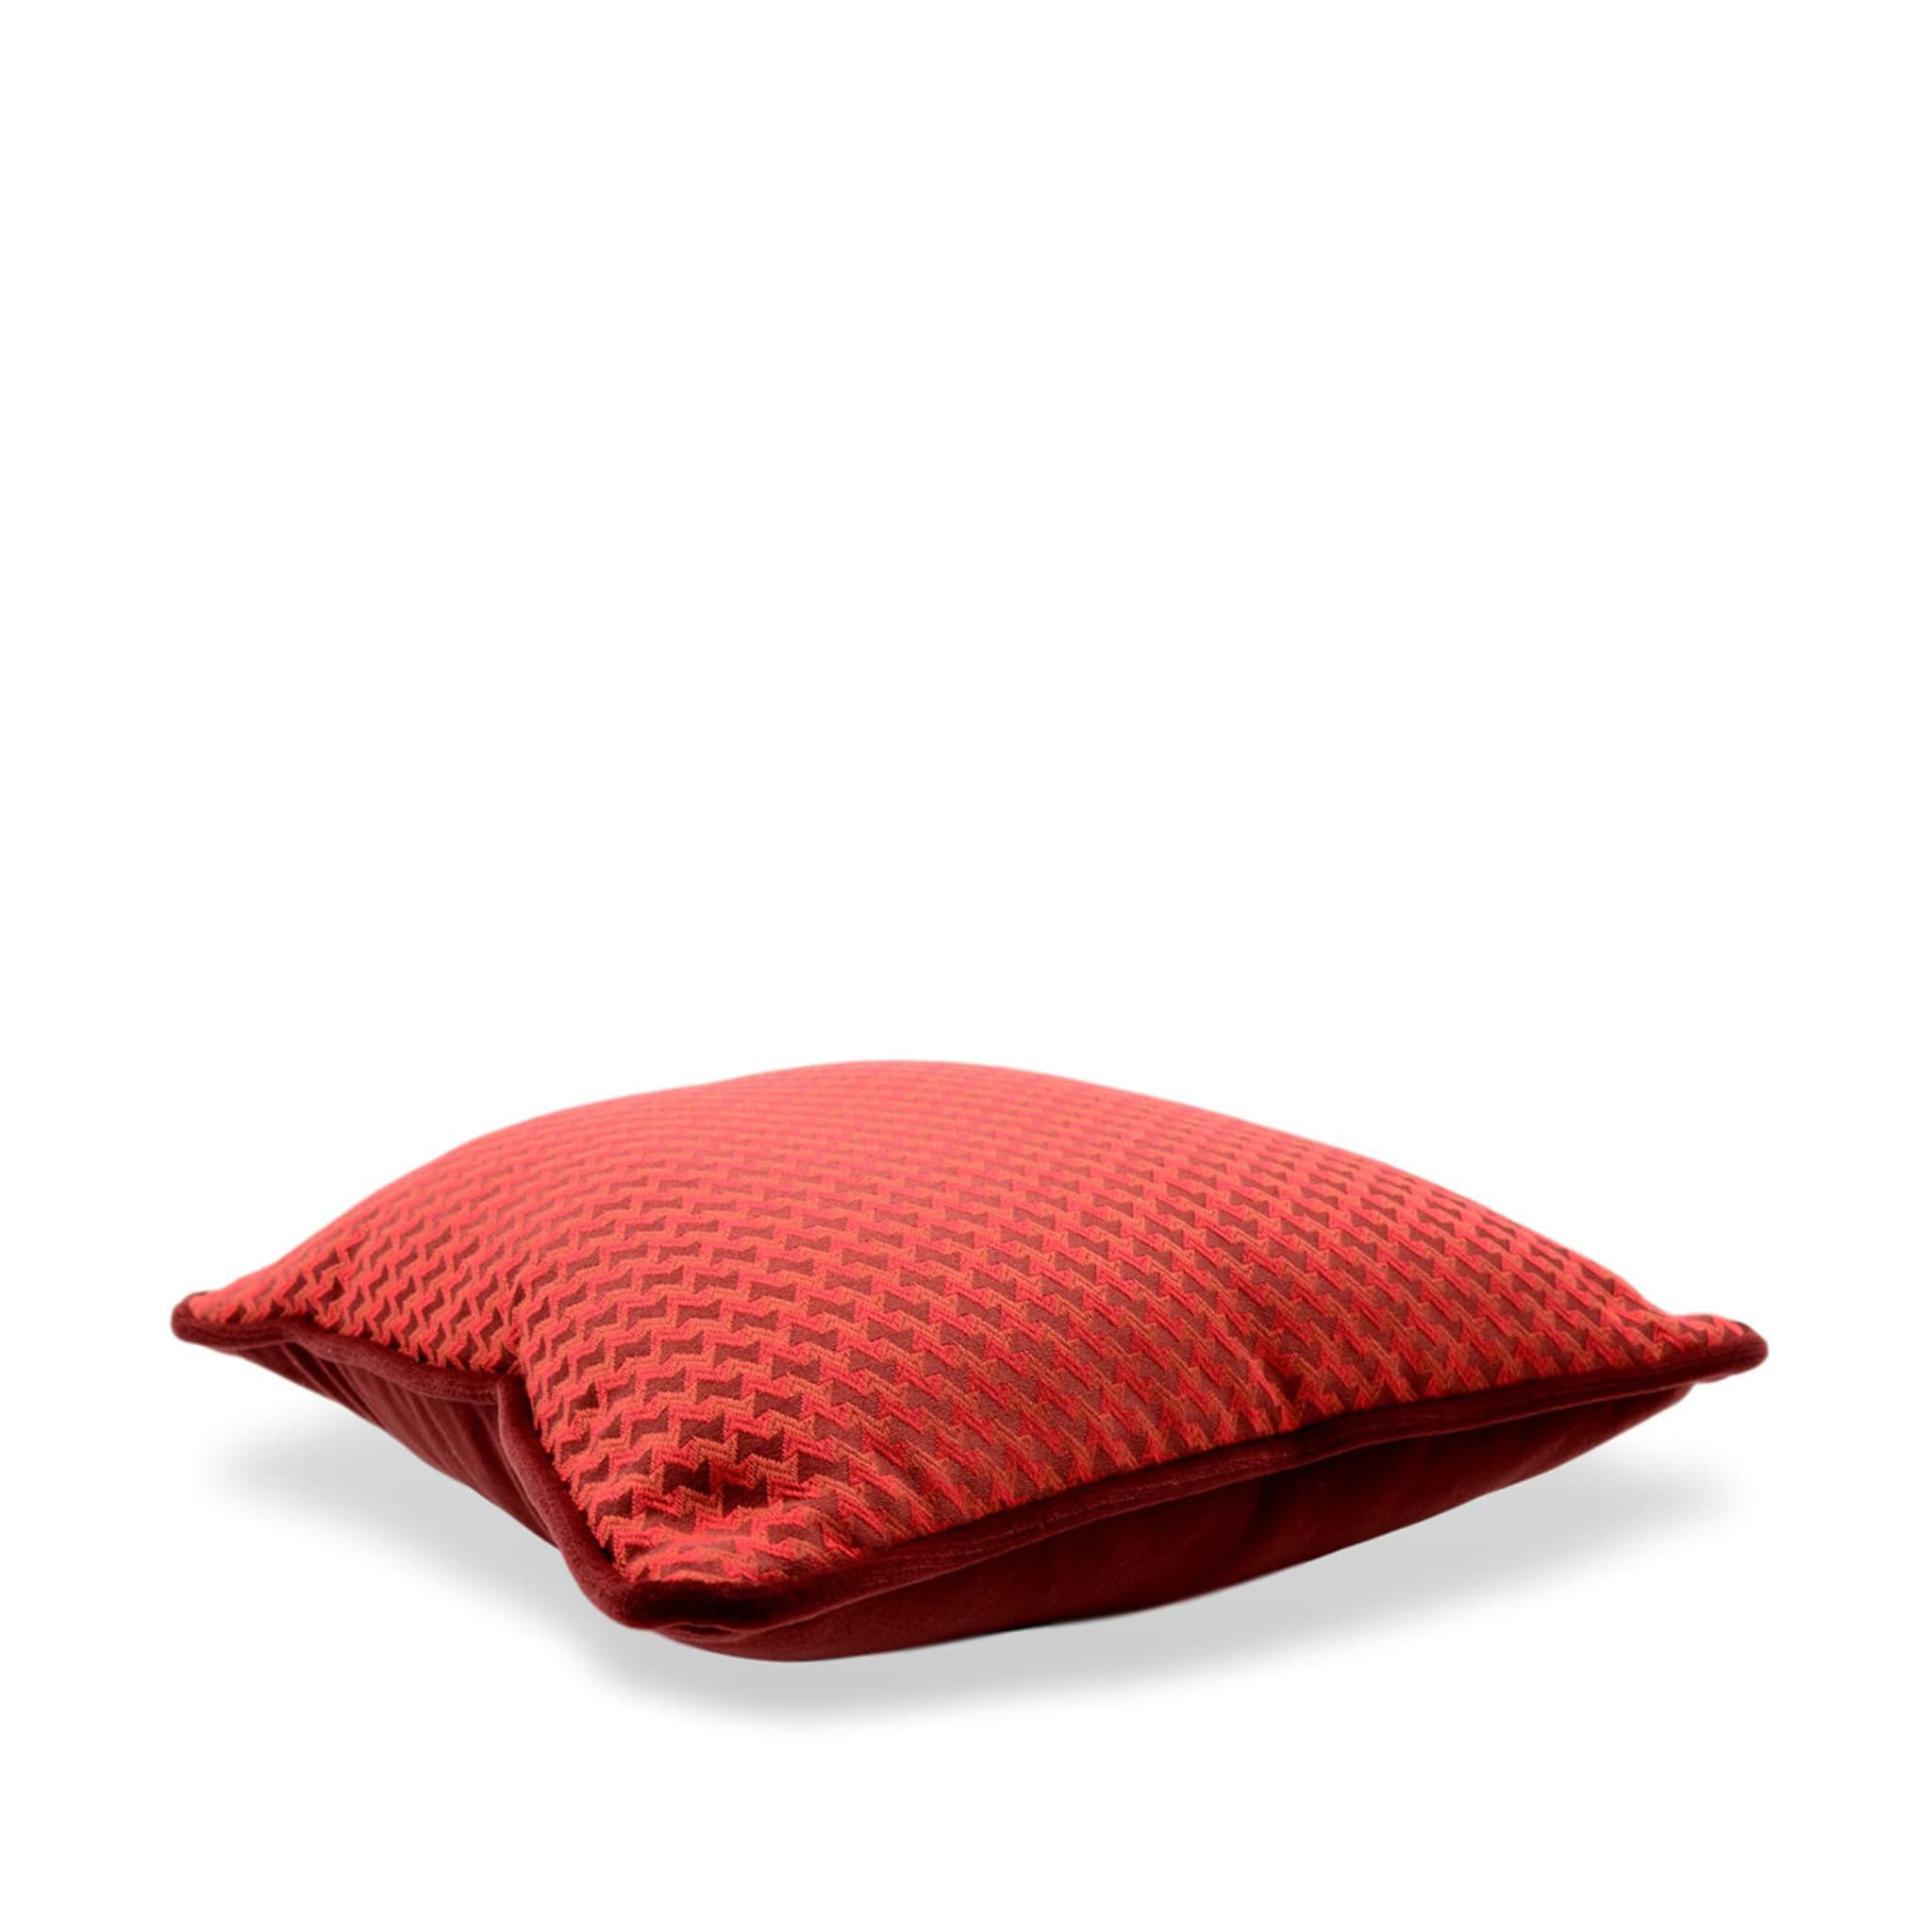 Red Carrè Cushion in micro patterned jacquard fabric - Alternative view 1